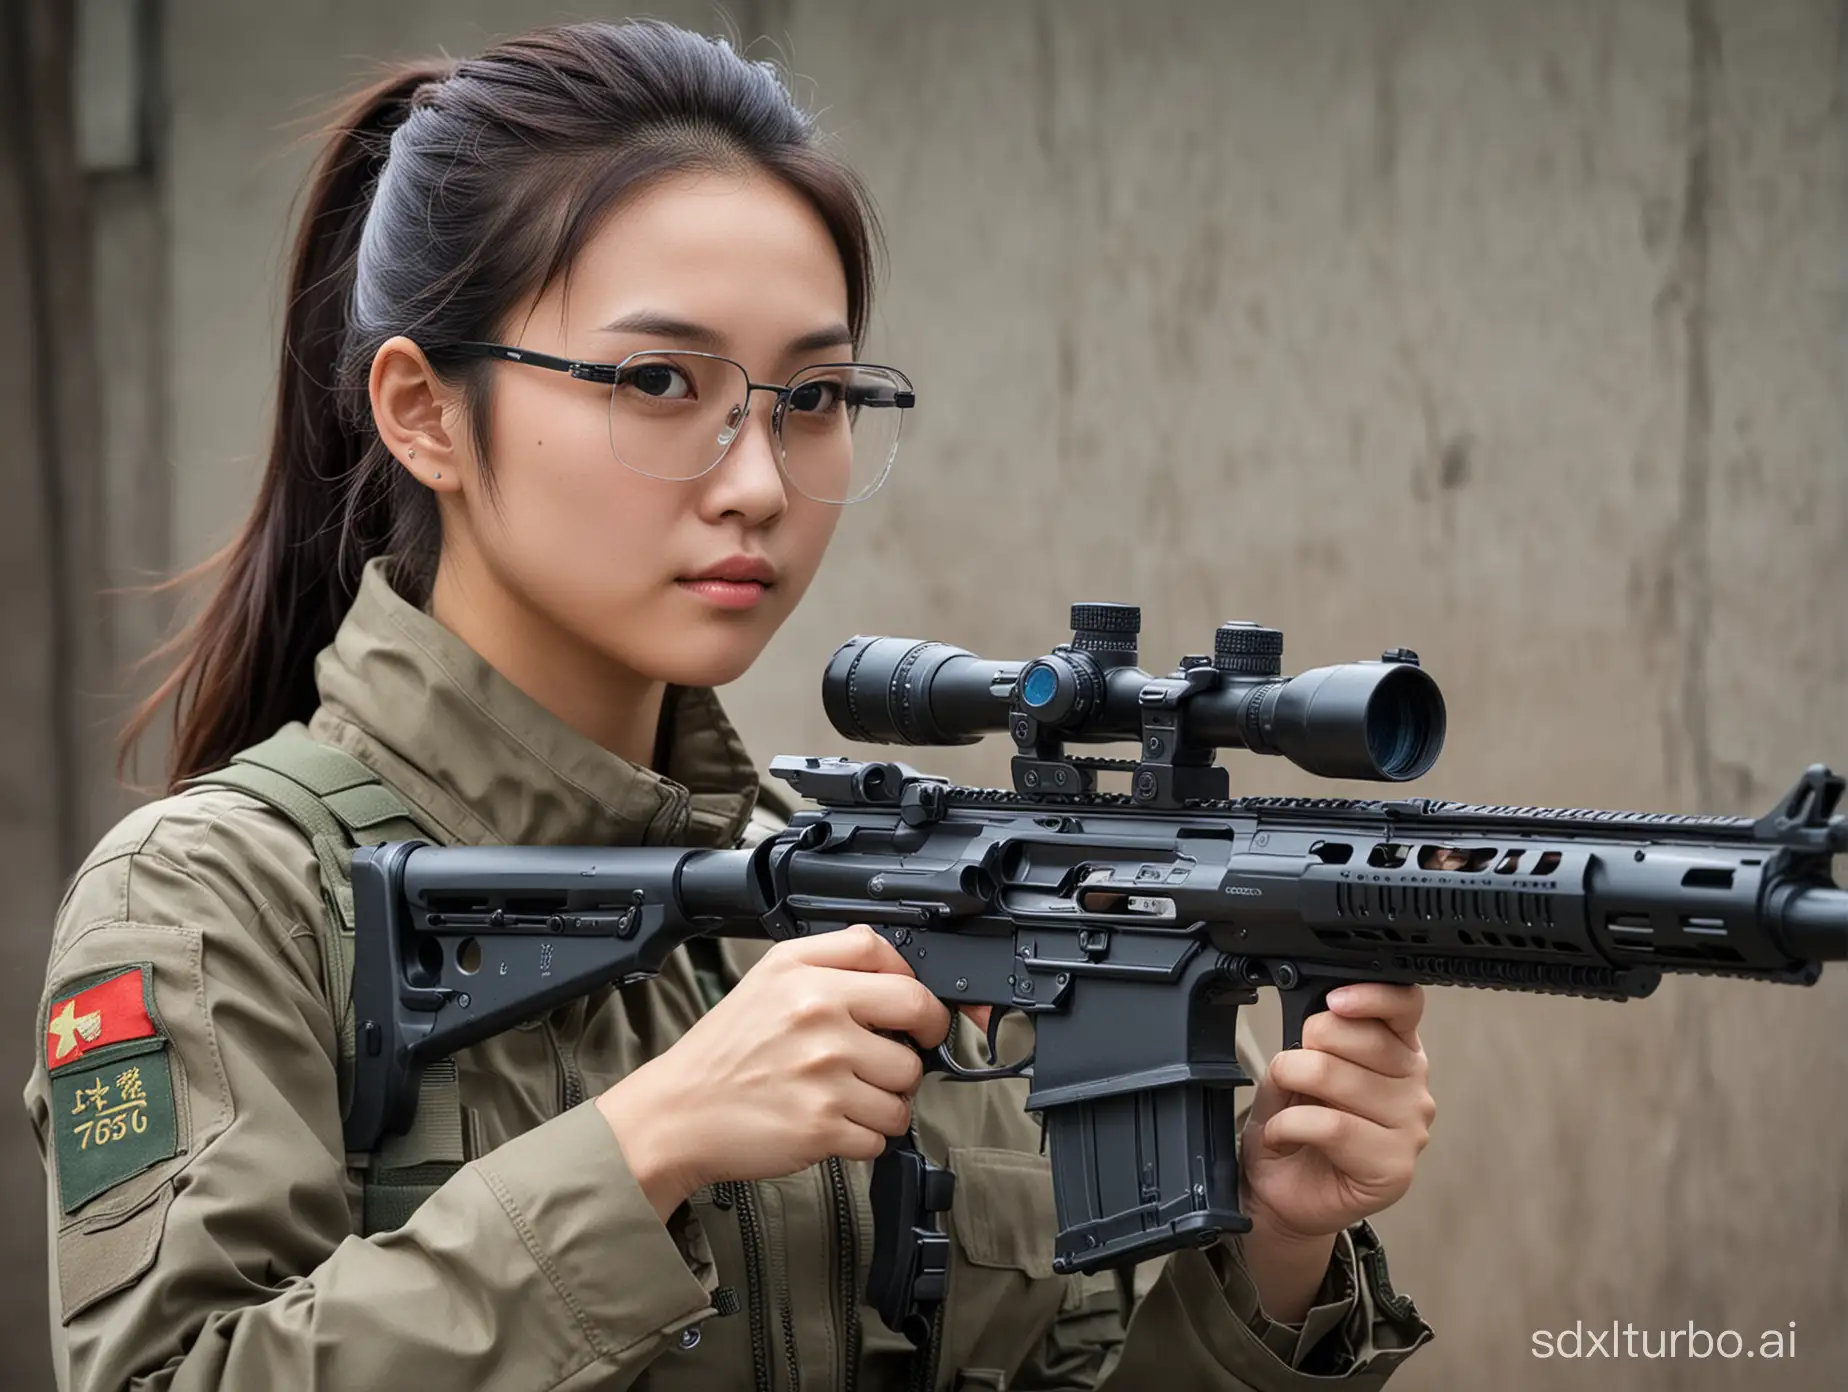 Chinese-Girl-with-Sniper-Rifle-and-Glasses-in-Futuristic-Style